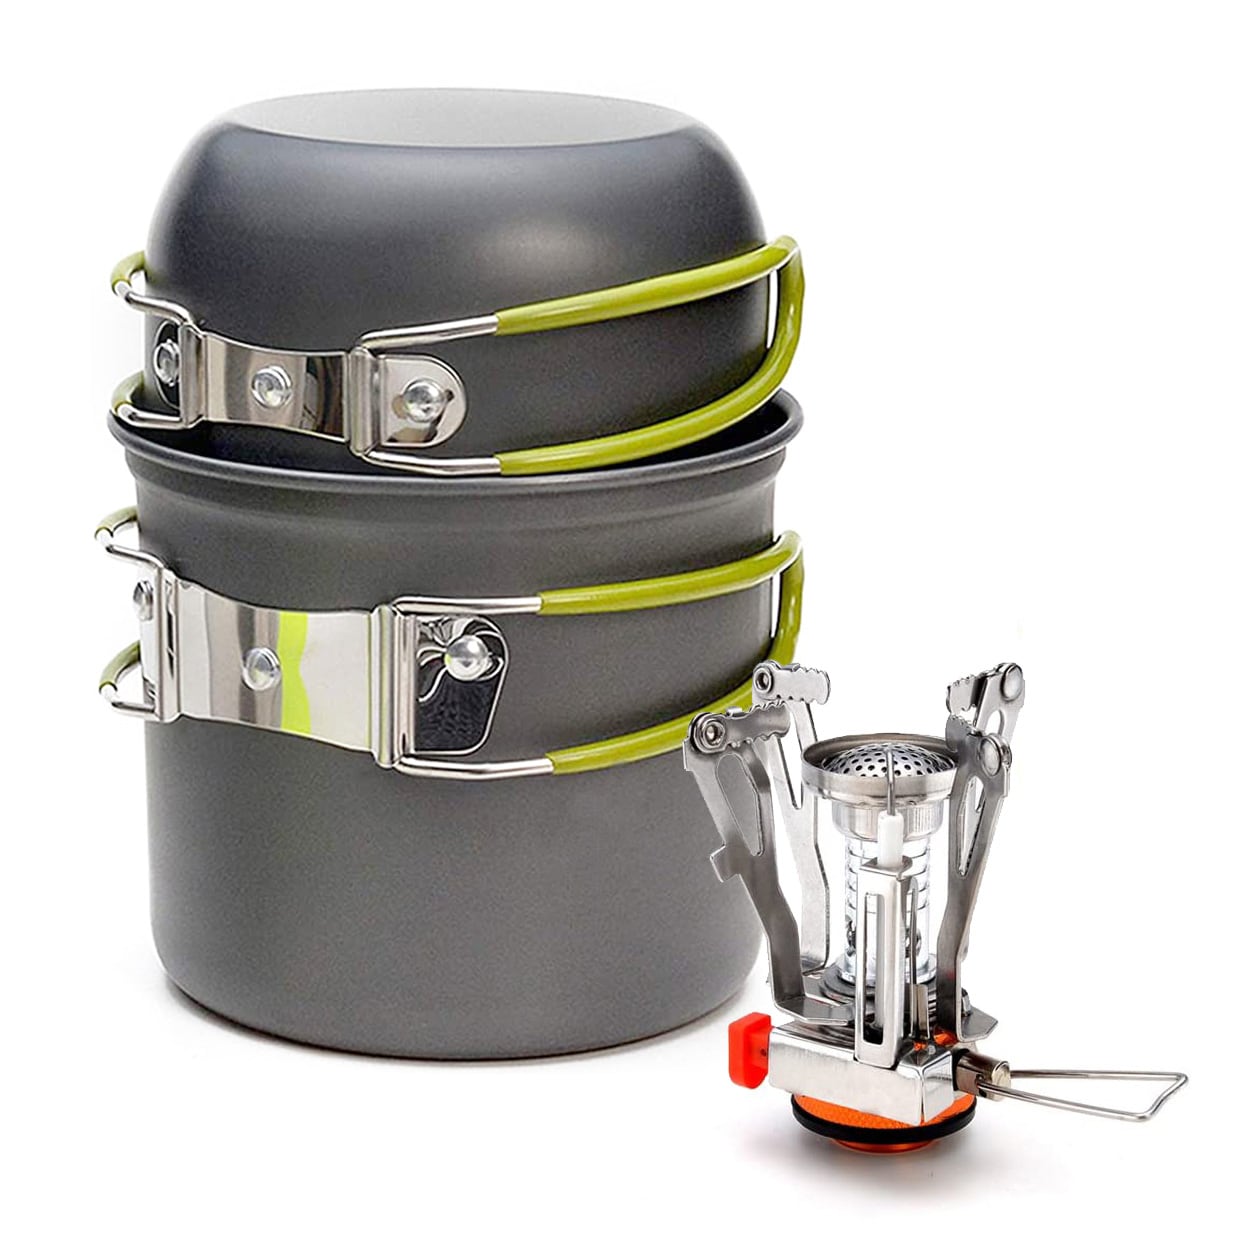 Stainless Steel Outdoor Cookwear Cooking Kit Military 2 Person Lightweight Portable CAMPING COOK SET